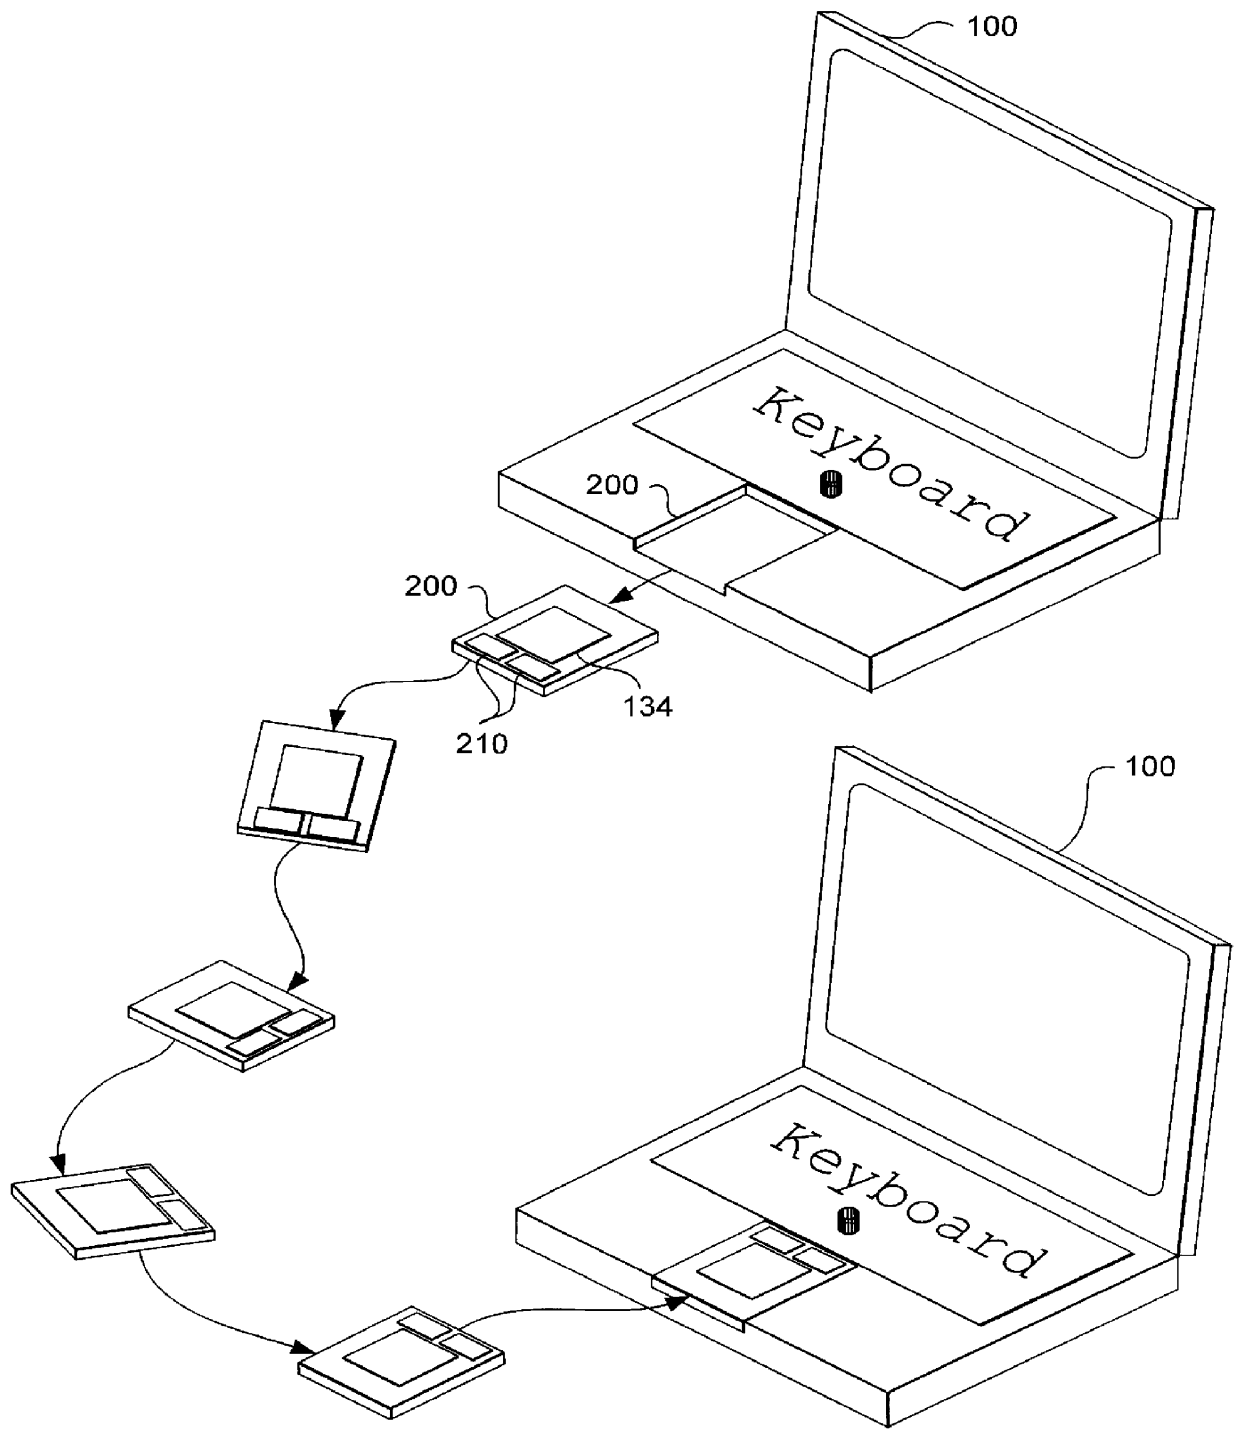 Laptop with buttons configured for use with multiple pointing devices